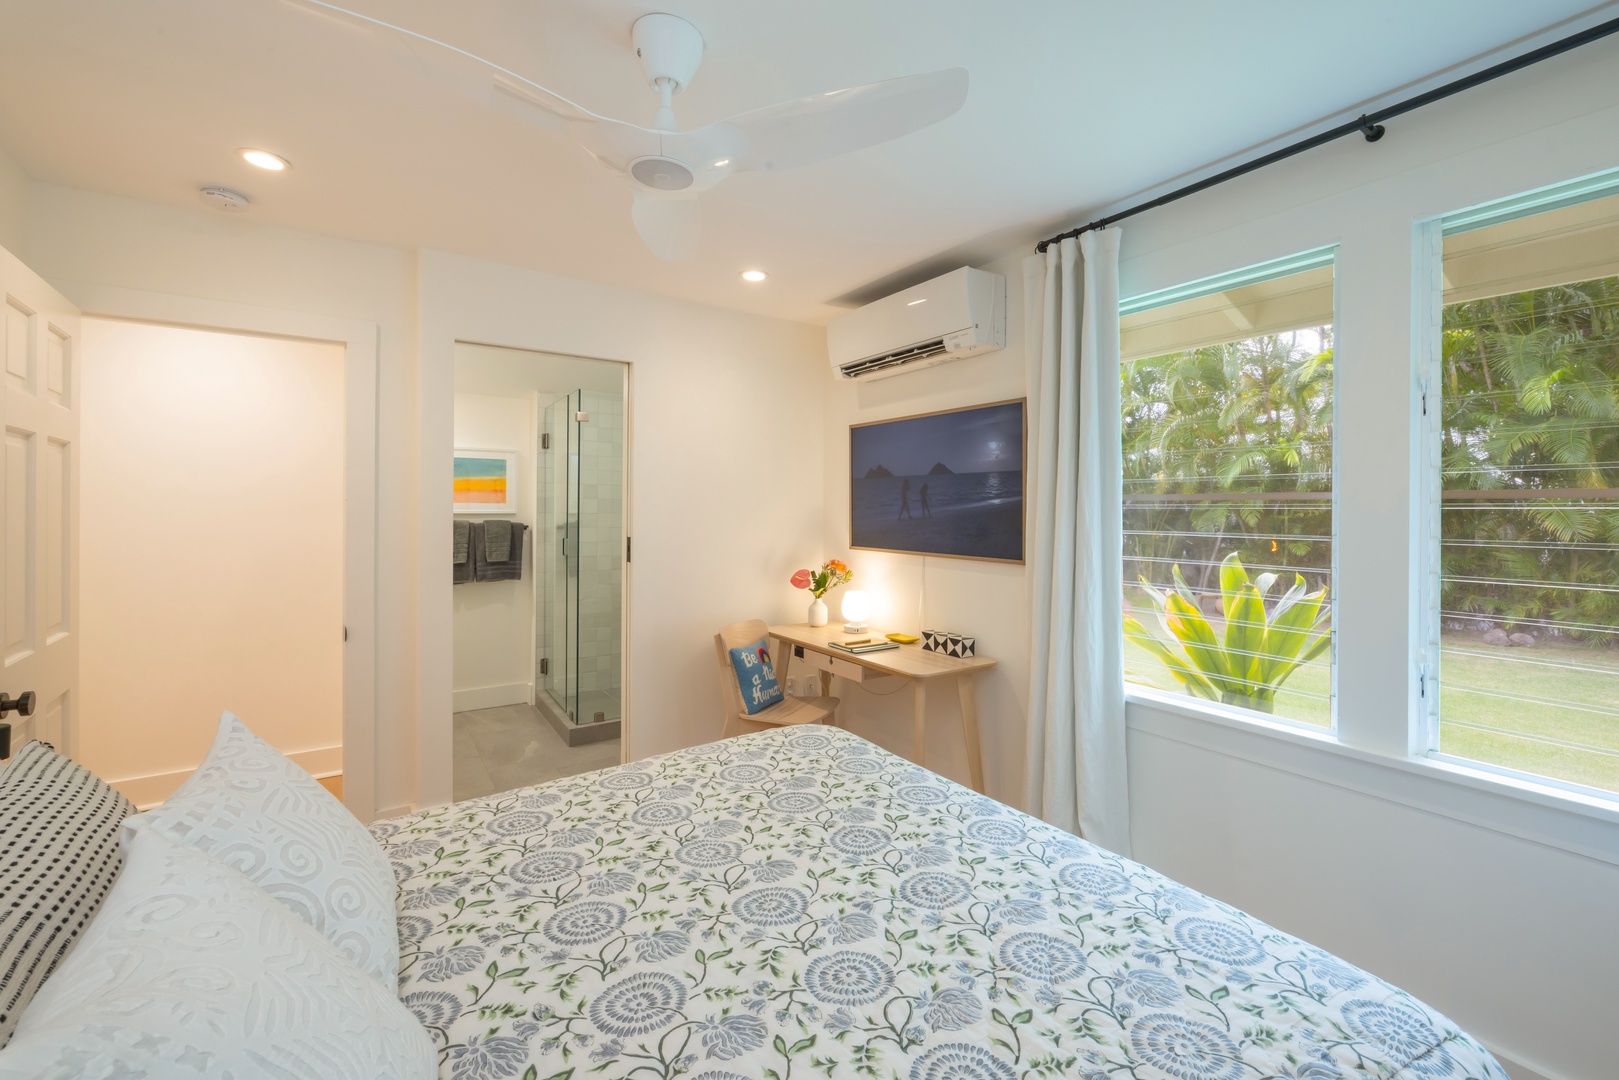 Kailua Vacation Rentals, Lanikai Ola Nani - From plush bedding to thoughtful amenities, our guest suite is a haven for travelers seeking a home away from home.